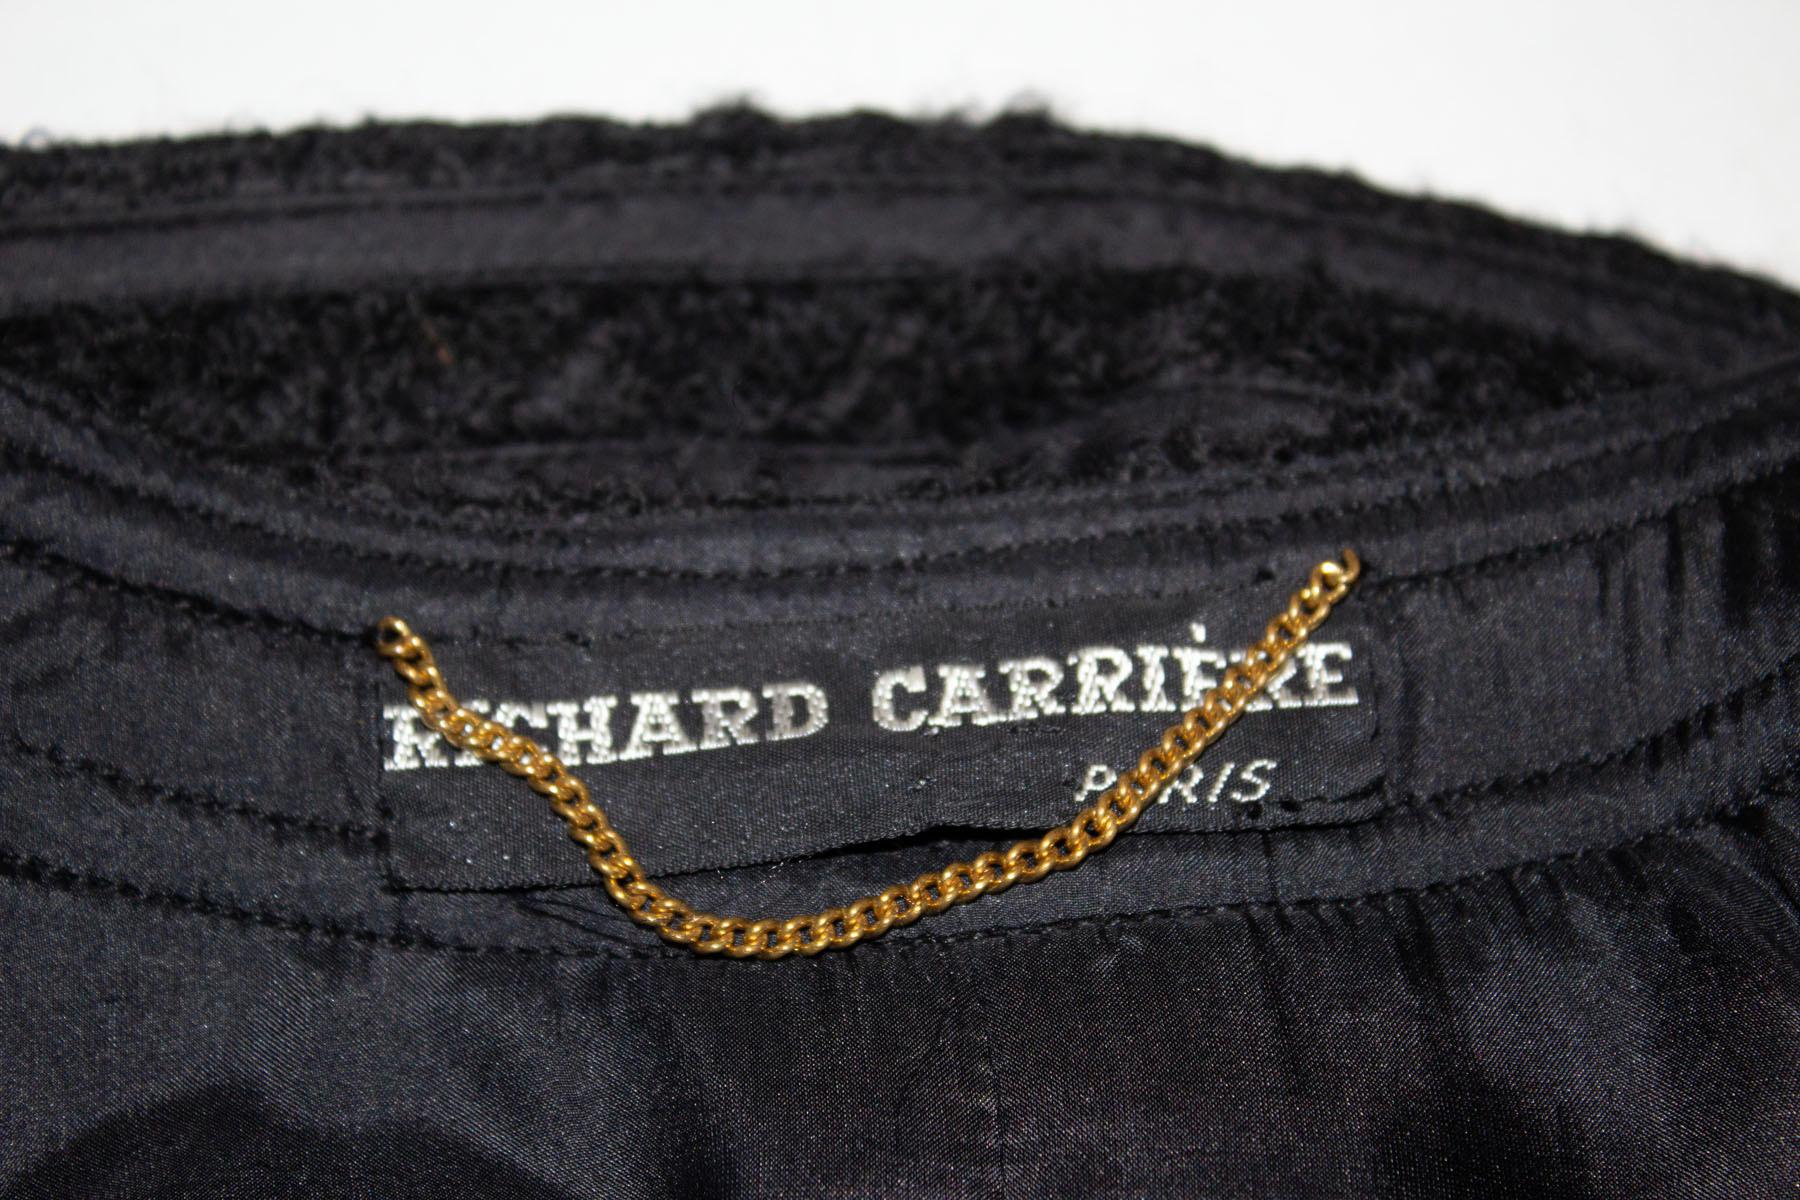 A vintage Richard Carriere Paris, hand finished Chanel style couture jacket. The jacket is in a black wool and has an eight button front opening, four pockets on the front, and a chain in the hem. Measurements: Bust up to 41'', length 22''